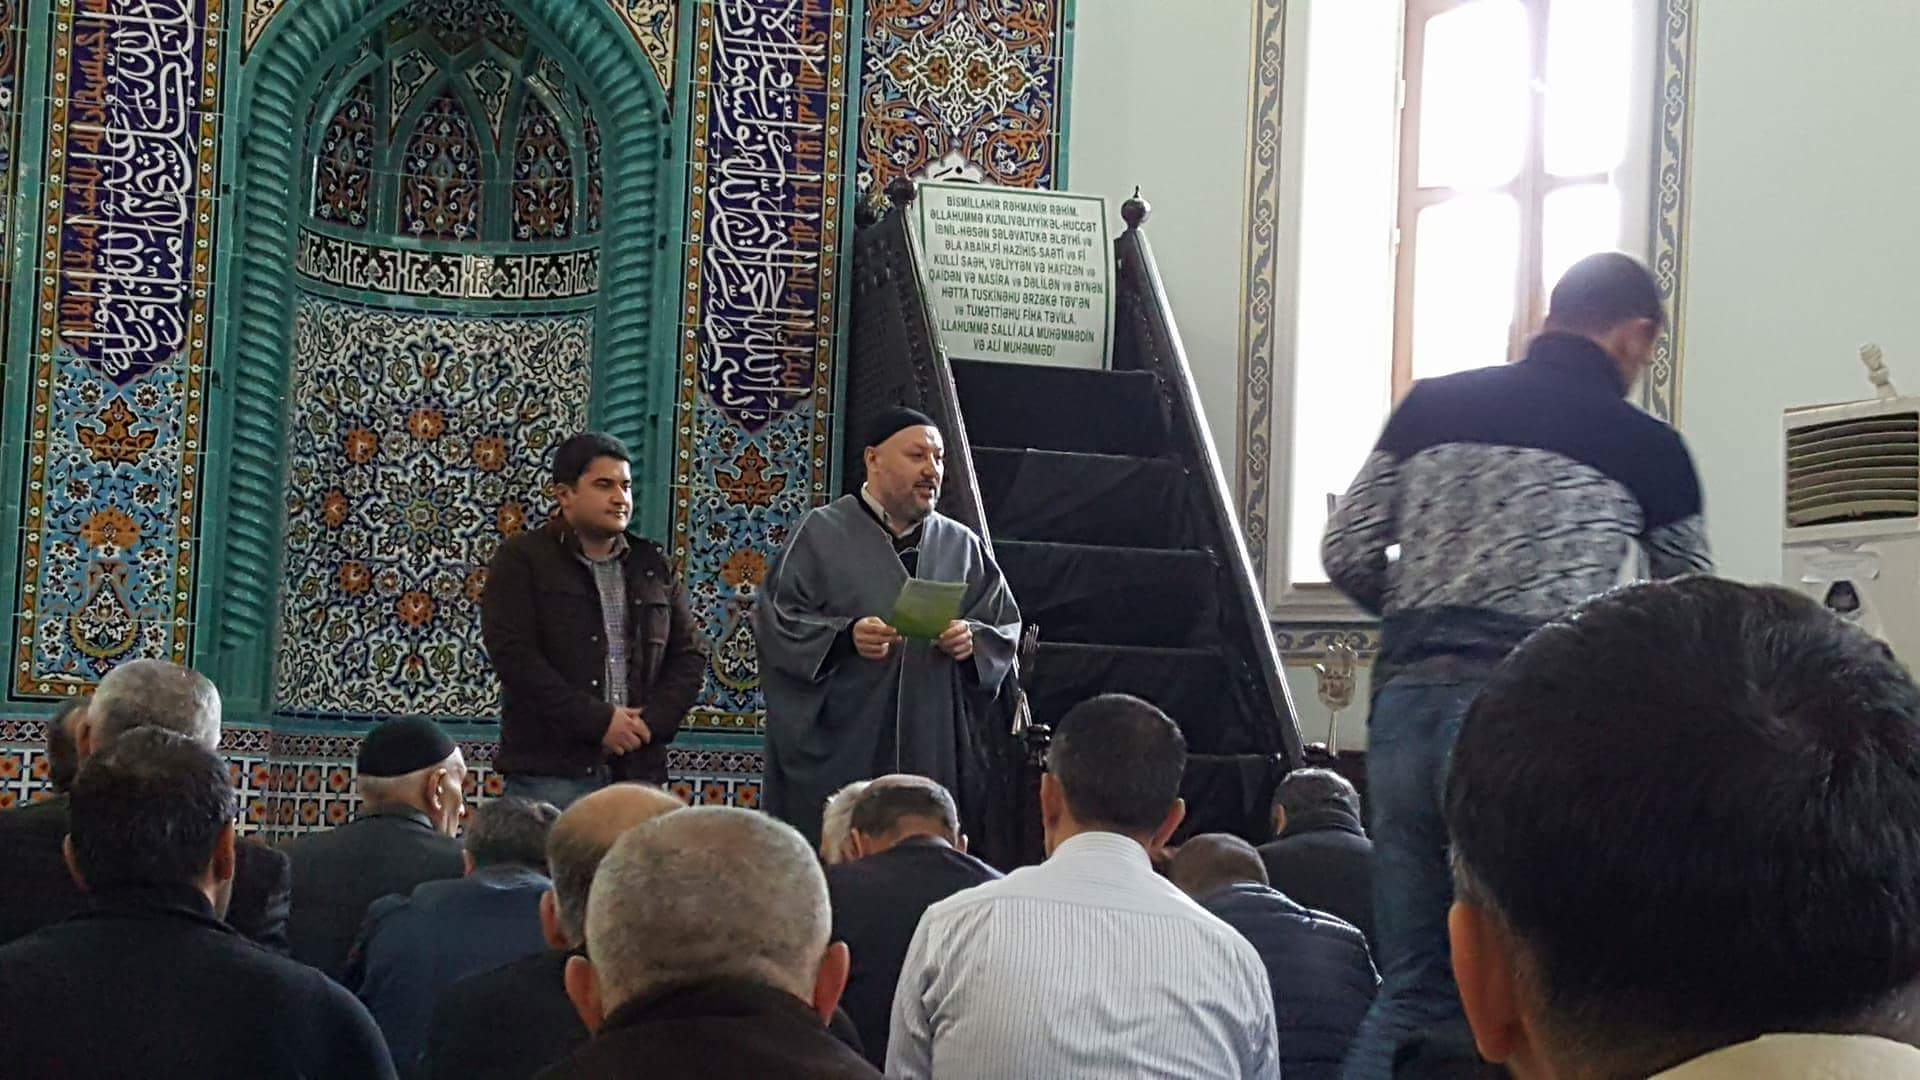 Sociologist Javid Shahmaliyev stands next to the imam during an awareness session held in a local mosque (photo: private)